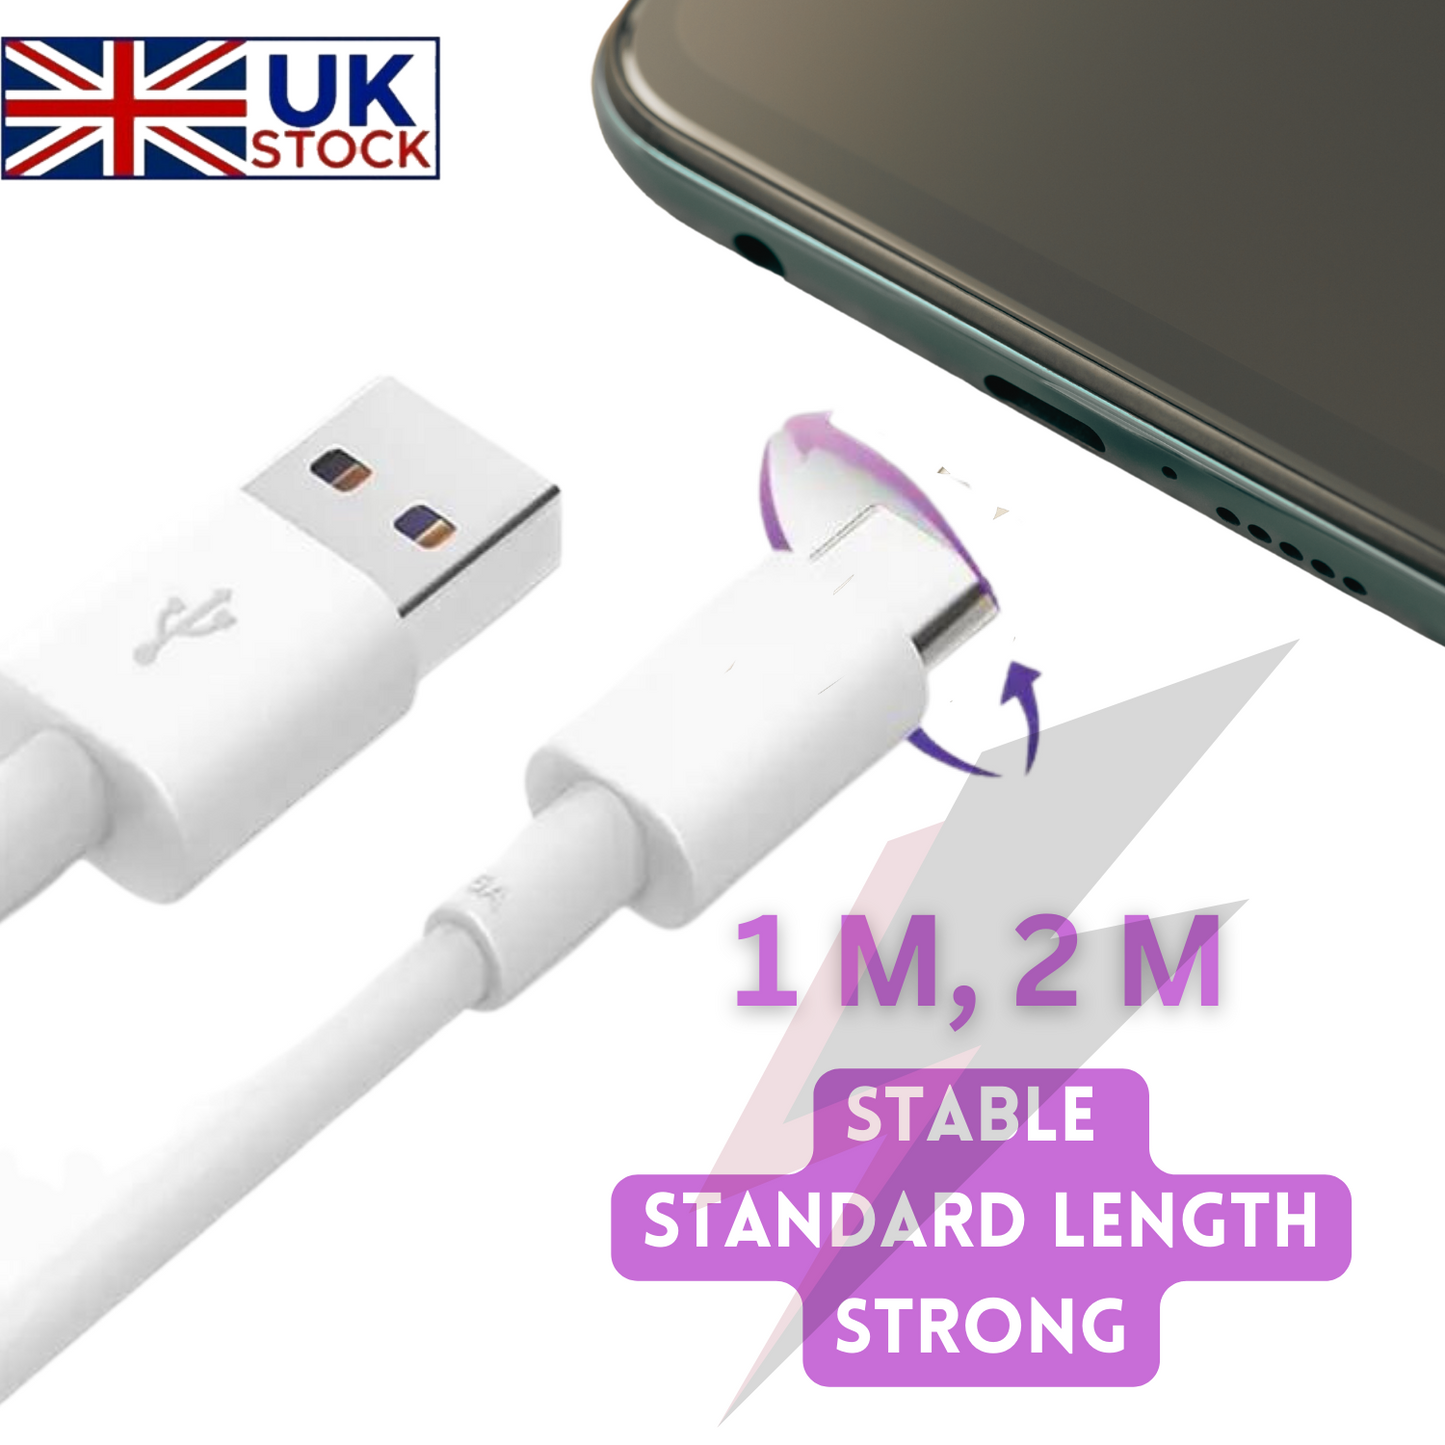 Super Fast Charging Type C 5A Usb Charger Data Cable For Huawei, Samsung